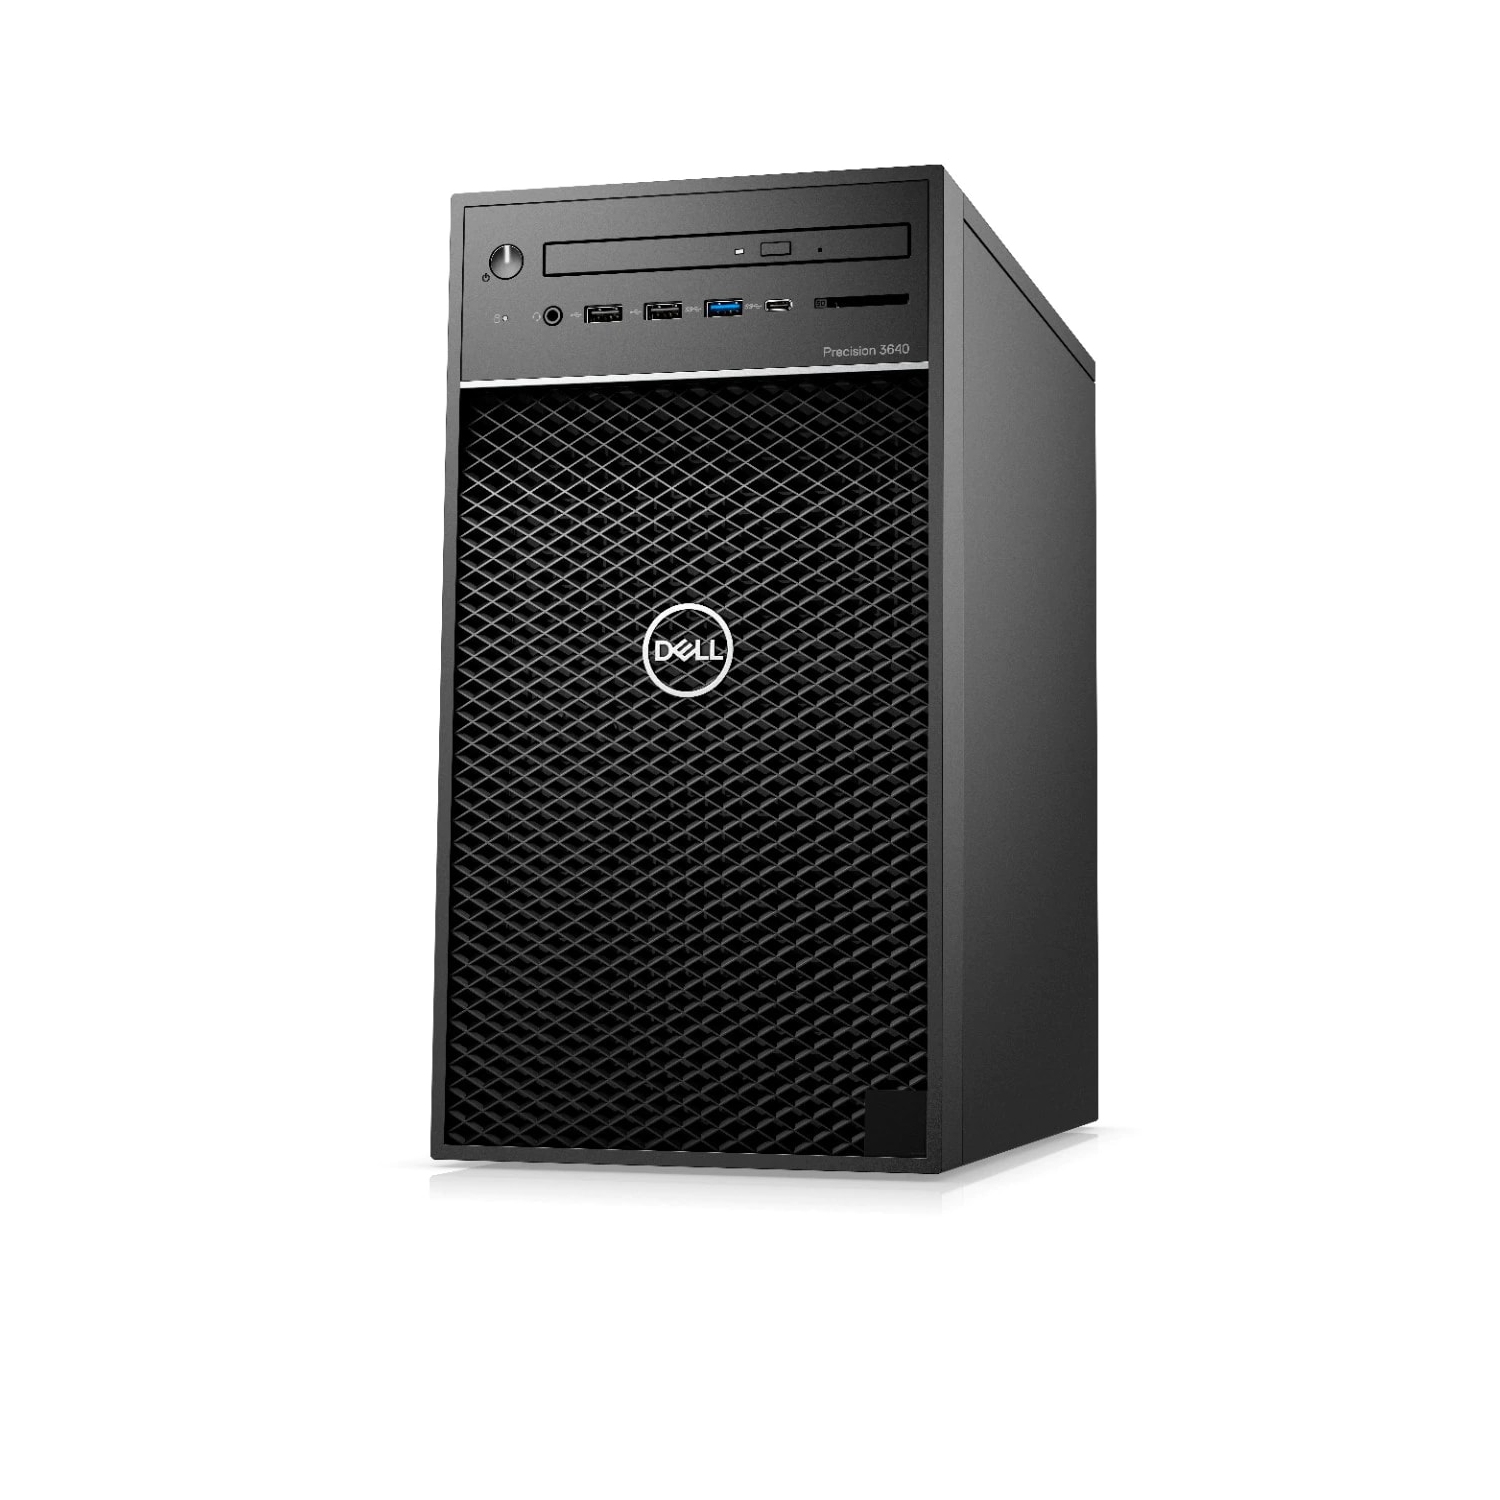 Refurbished (Excellent) - Dell Precision T3640 Workstation Desktop (2018), Core i9, 512GB SSD, 32GB RAM, RTX 5000, 10 Cores @ 5.3 GHz, 10th Gen CPU Certified Refurbished